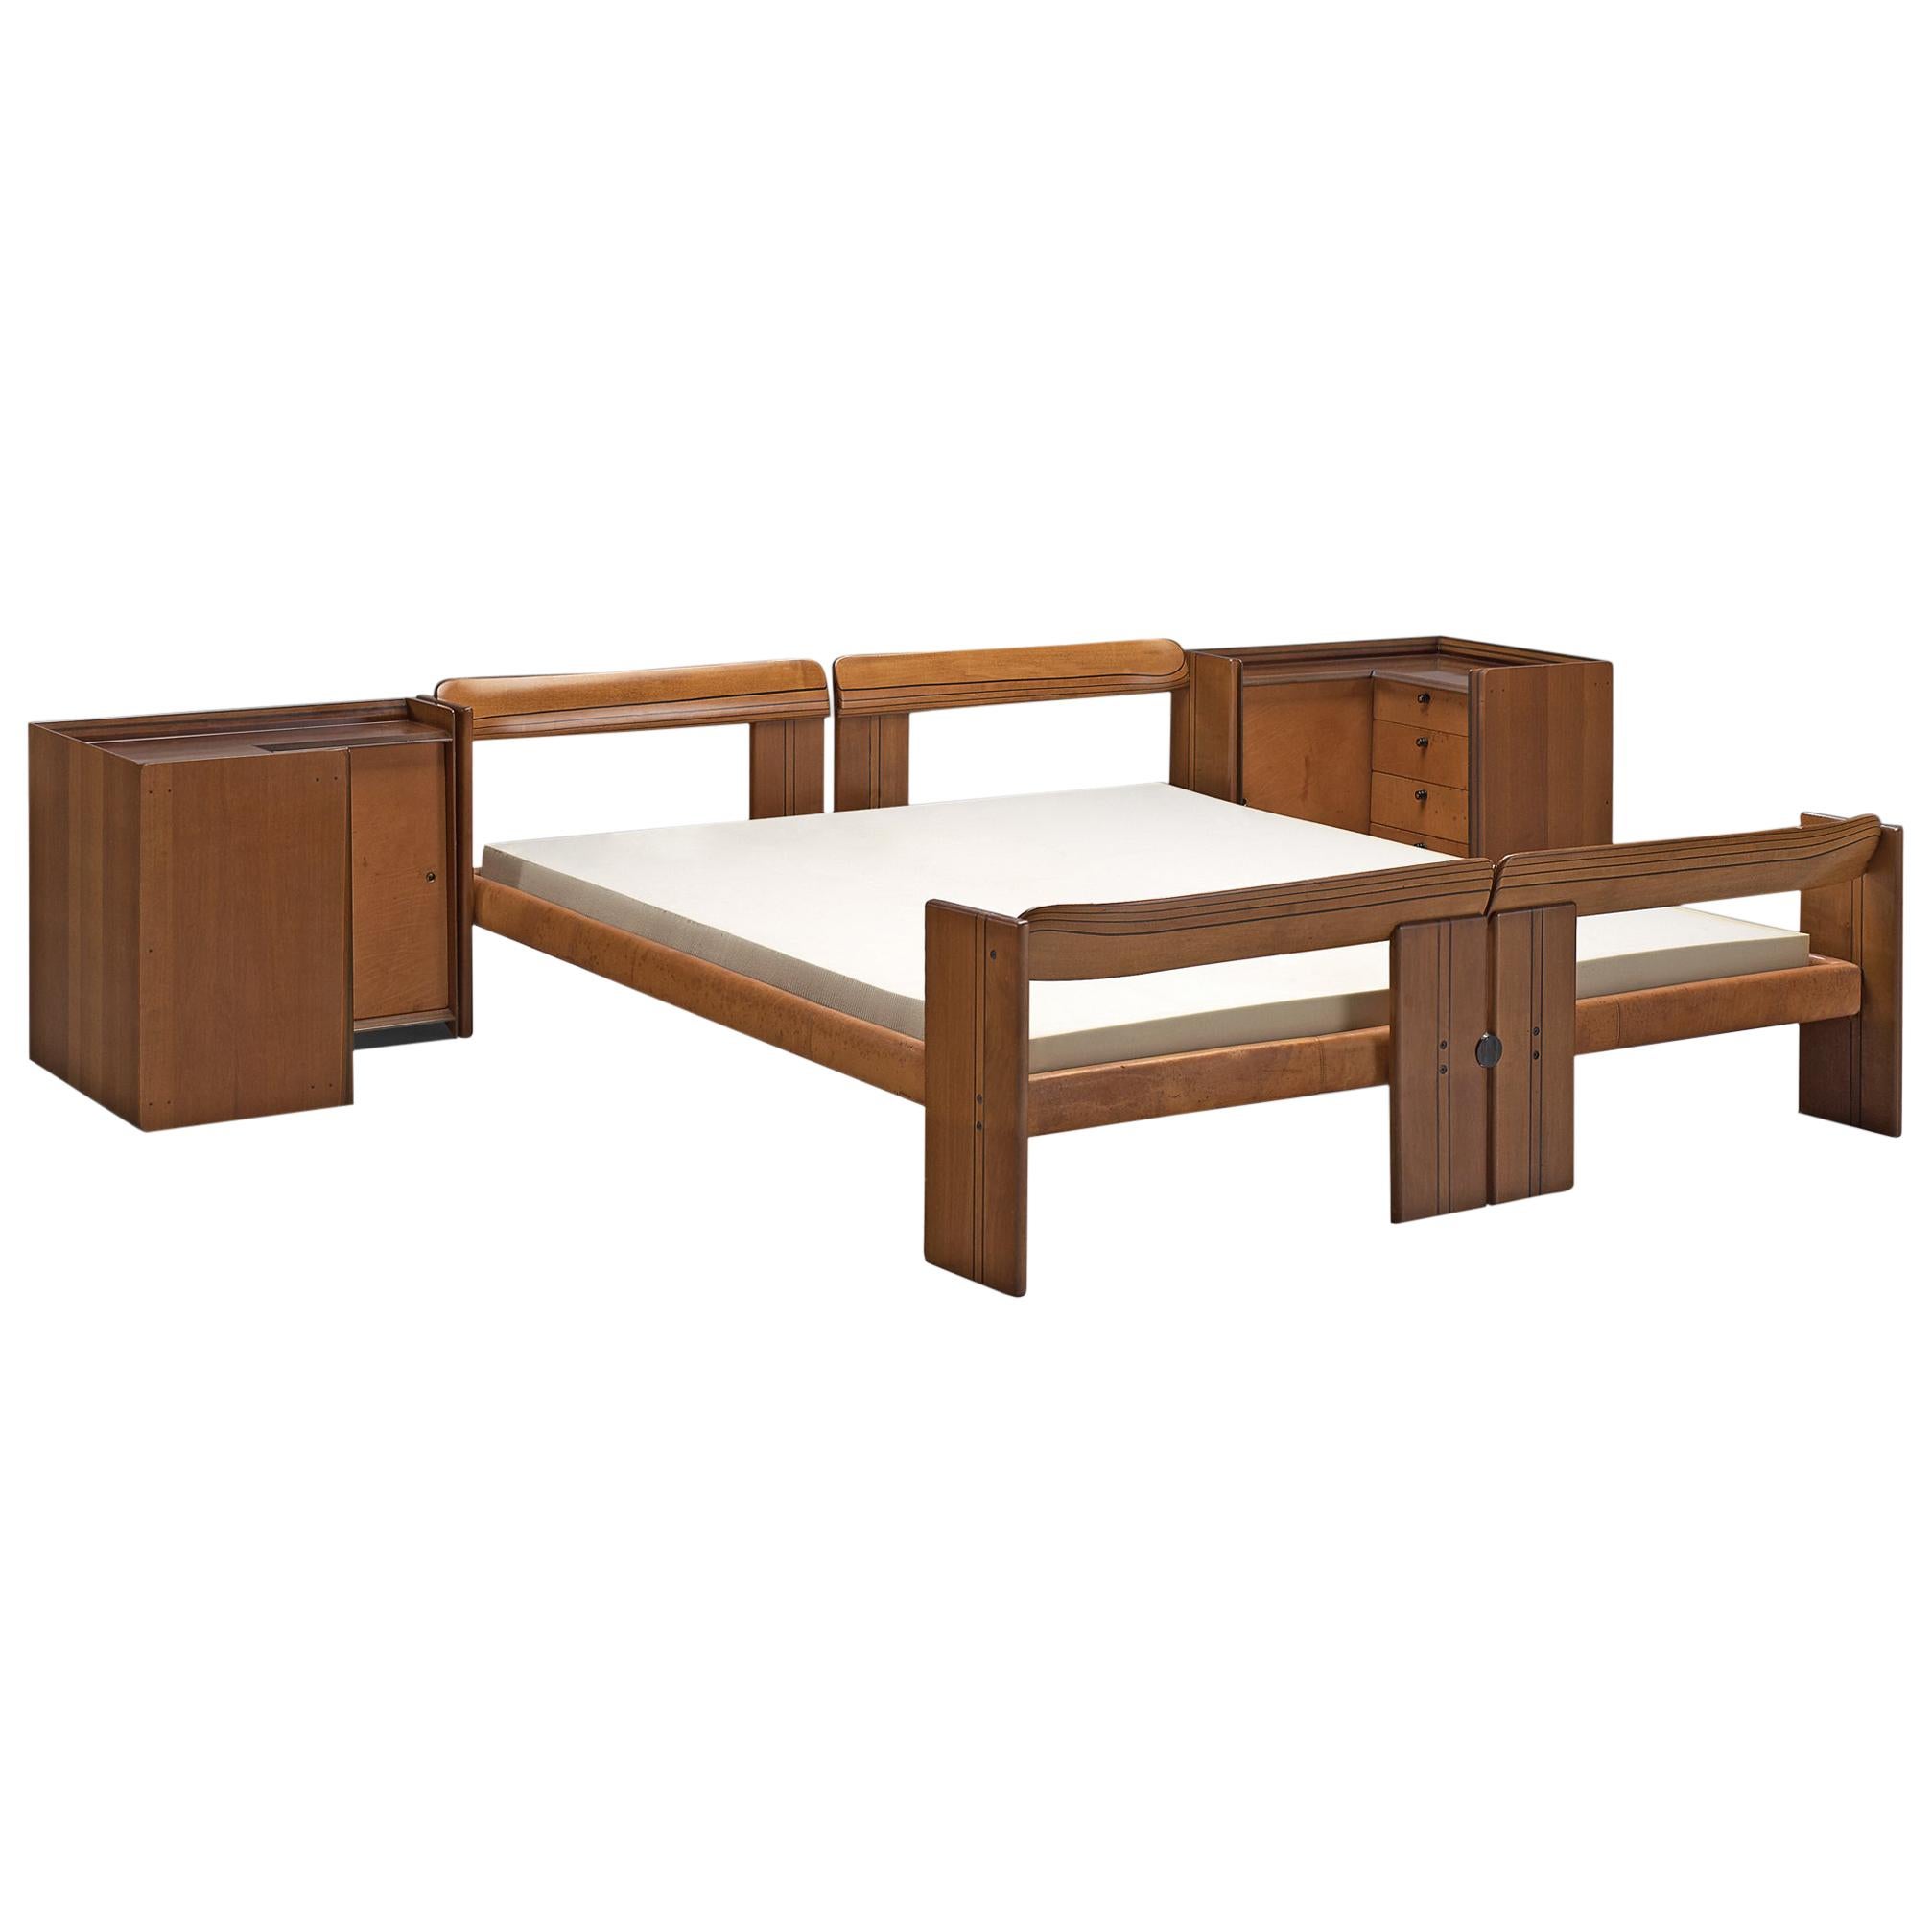 Afra & Tobia Scarpa 'Artona' King Size Bed with Nightstands